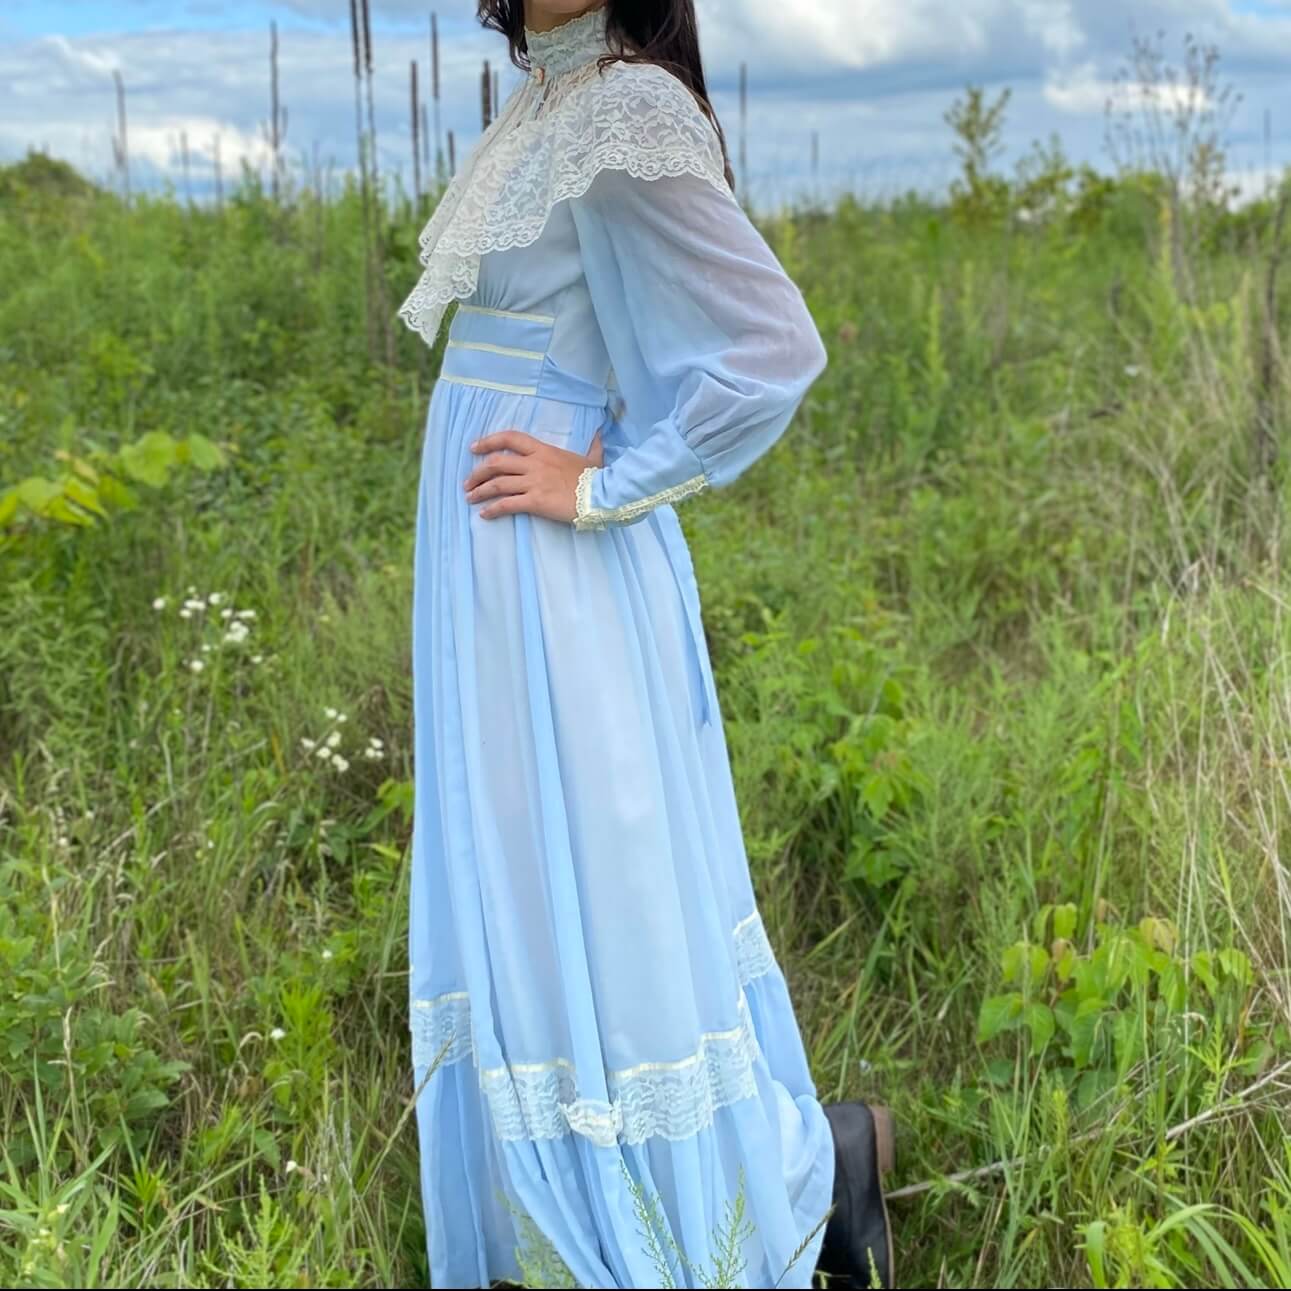 model wearing a blue cotton long dress from the 70s with a white lace high neck collar in front of green grass